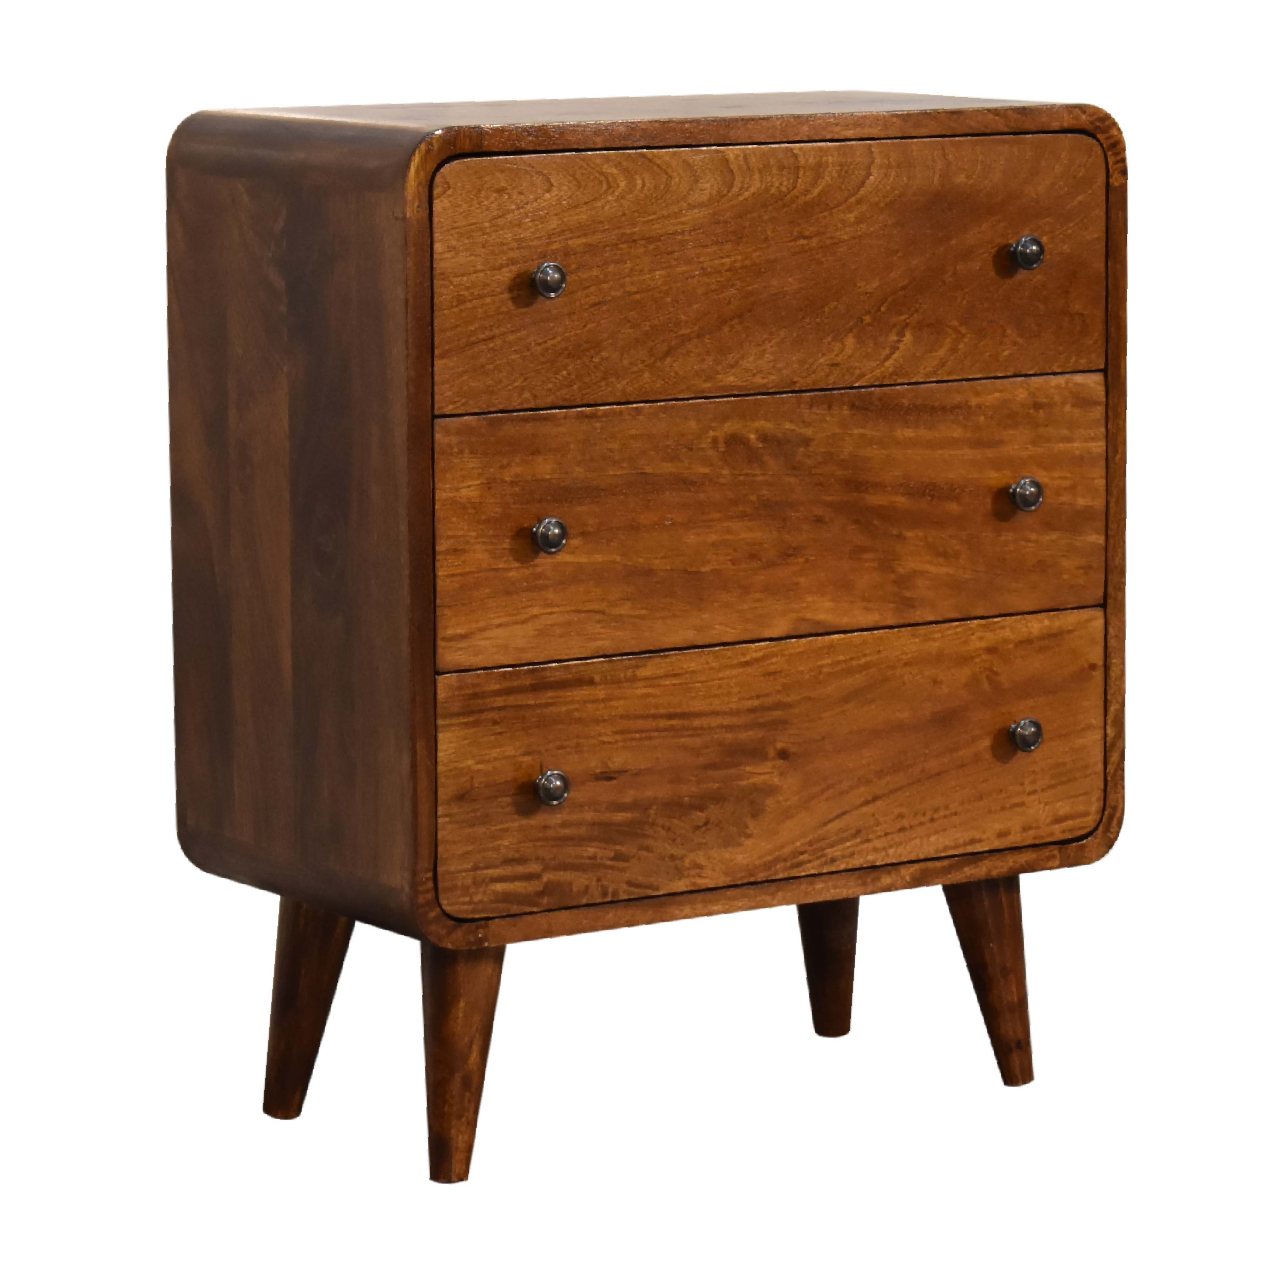 Mini Century Solid Wood Compact Chest of Drawers in Deep Chestnut finish | Malletandplane.com